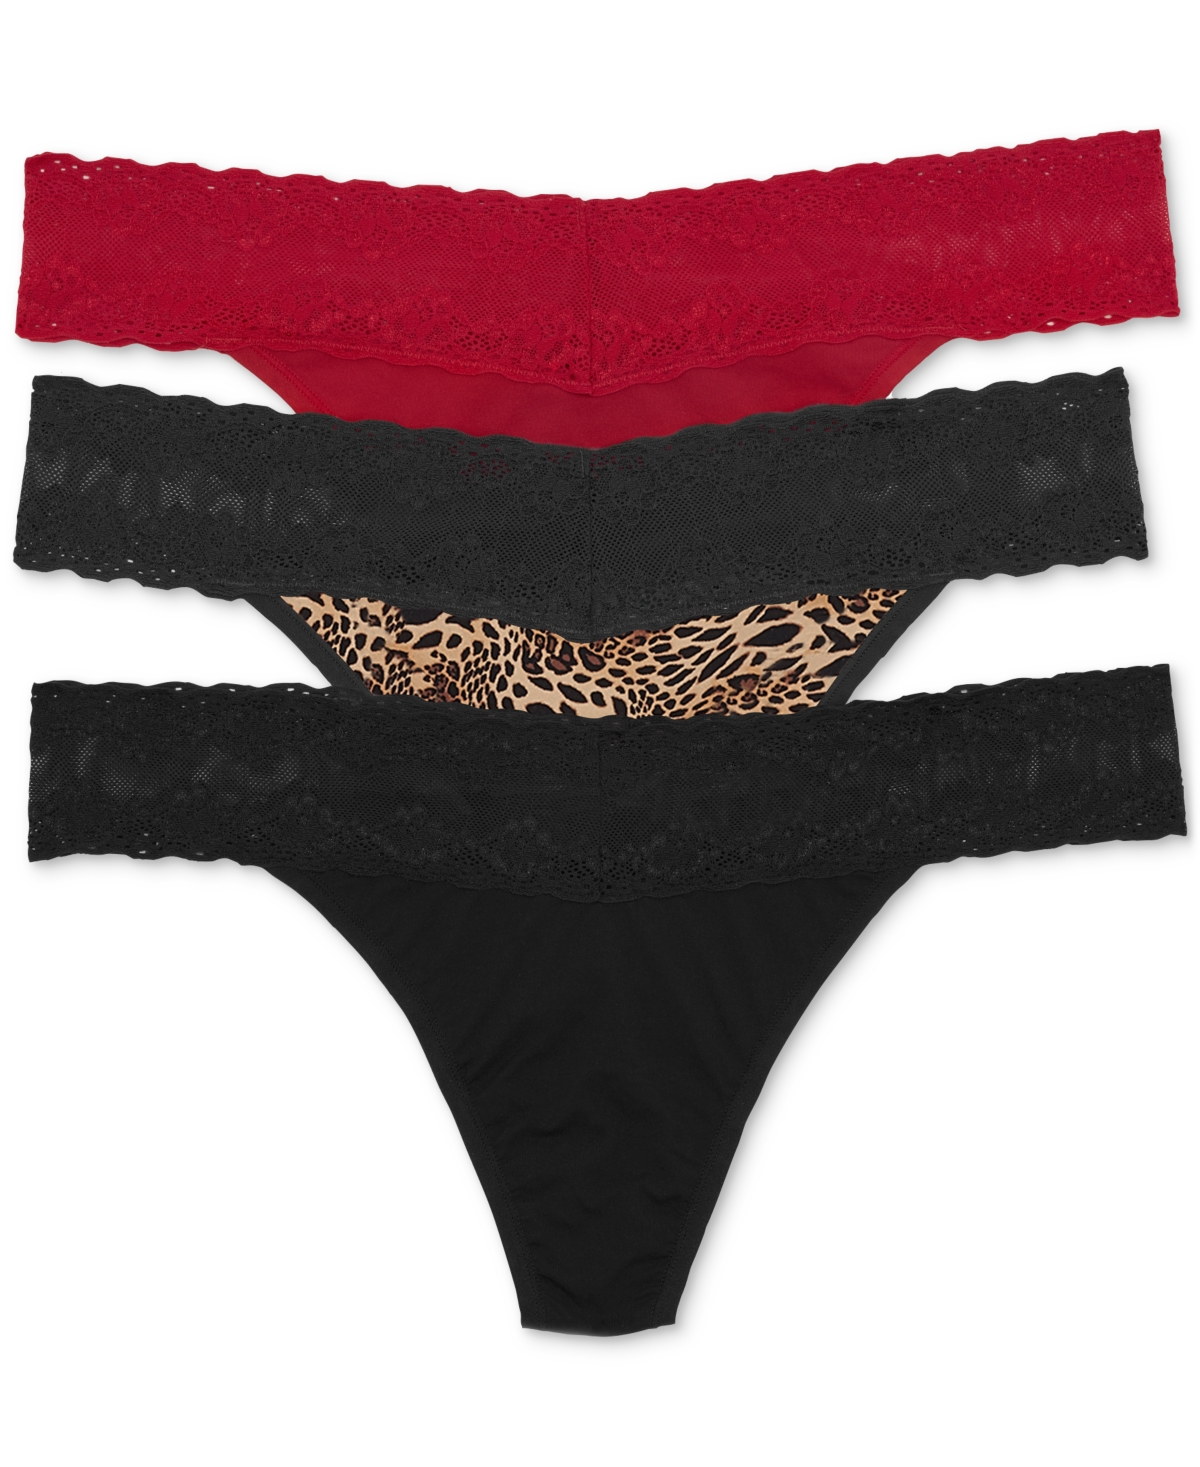 NATORI BLISS PERFECTION LACE-TRIM THONG, PACK OF 3 750092MP